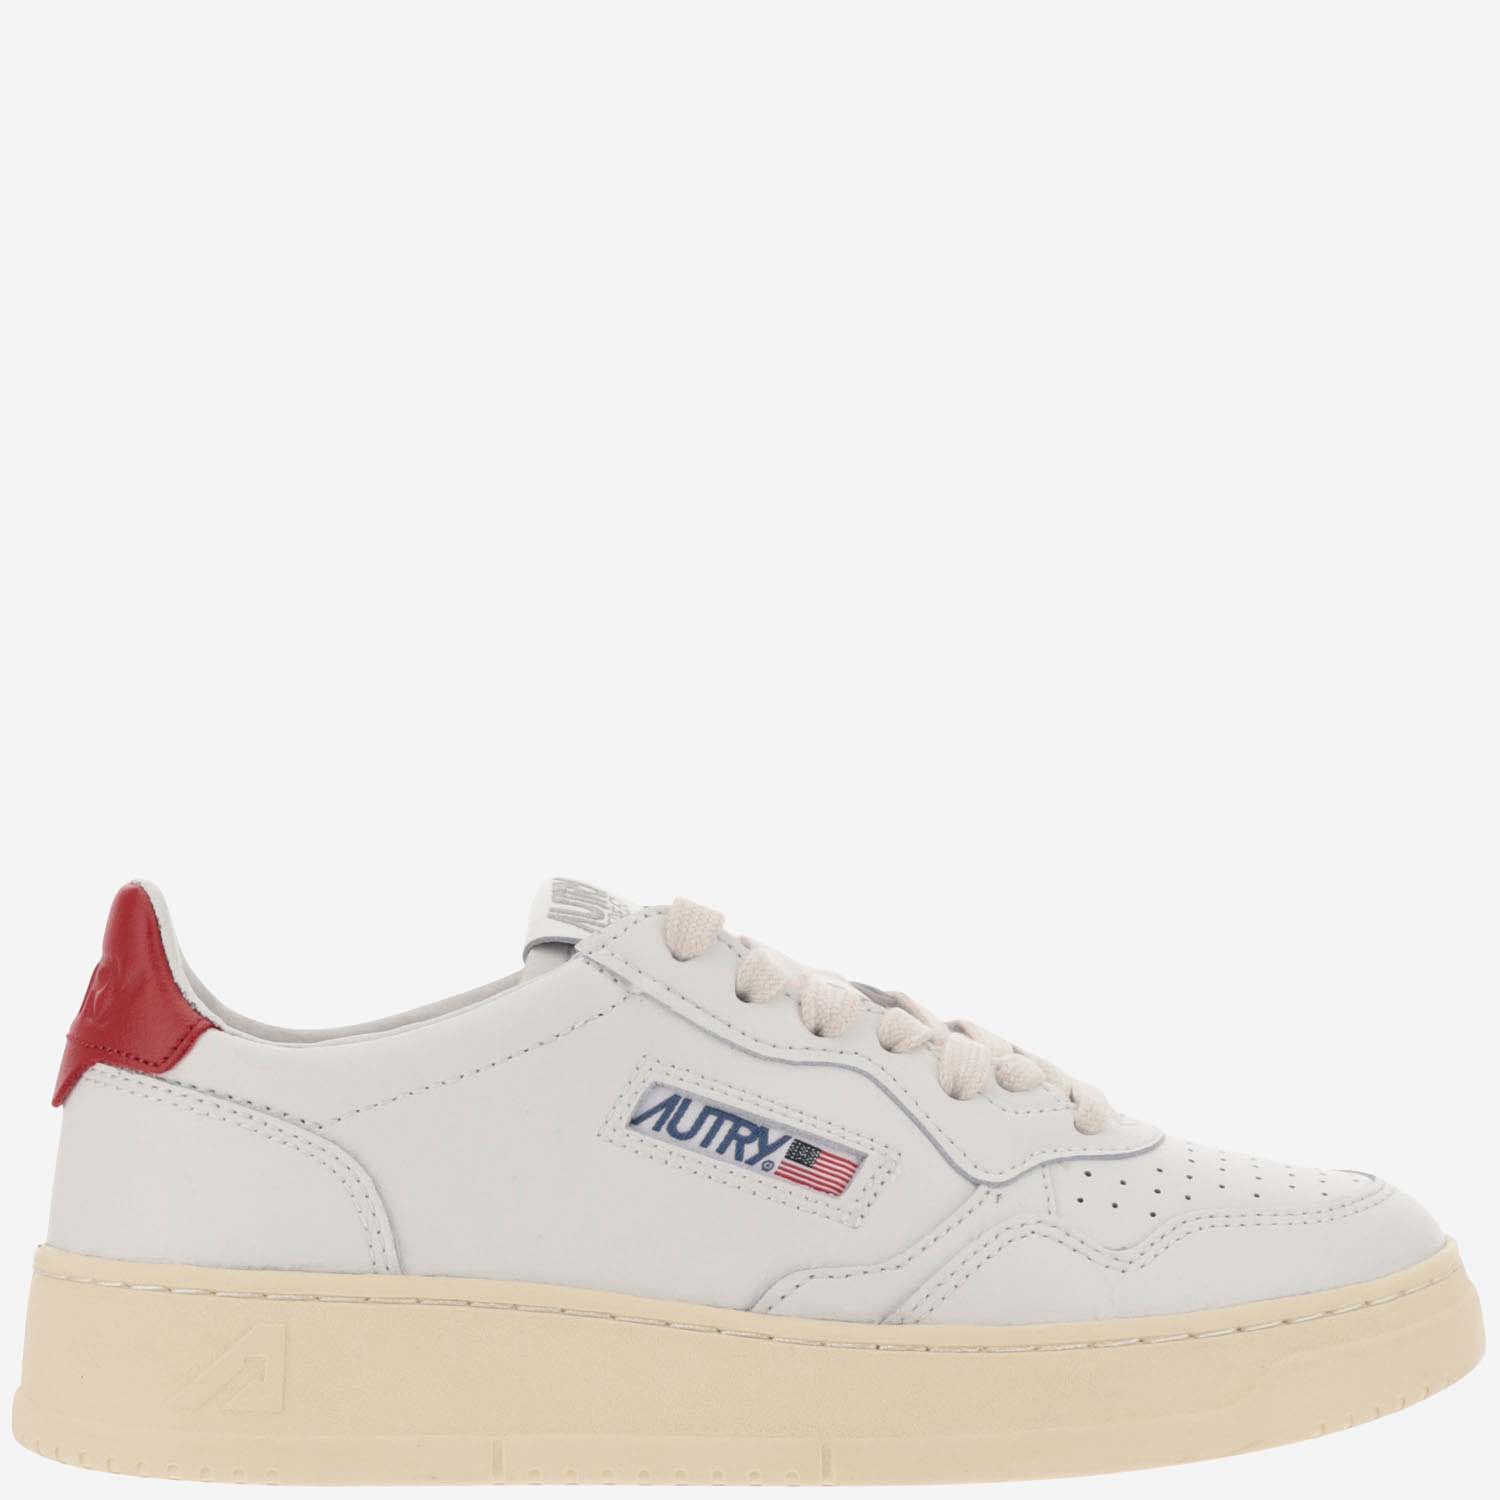 AUTRY LOW MEDALIST LEATHER SNEAKERS